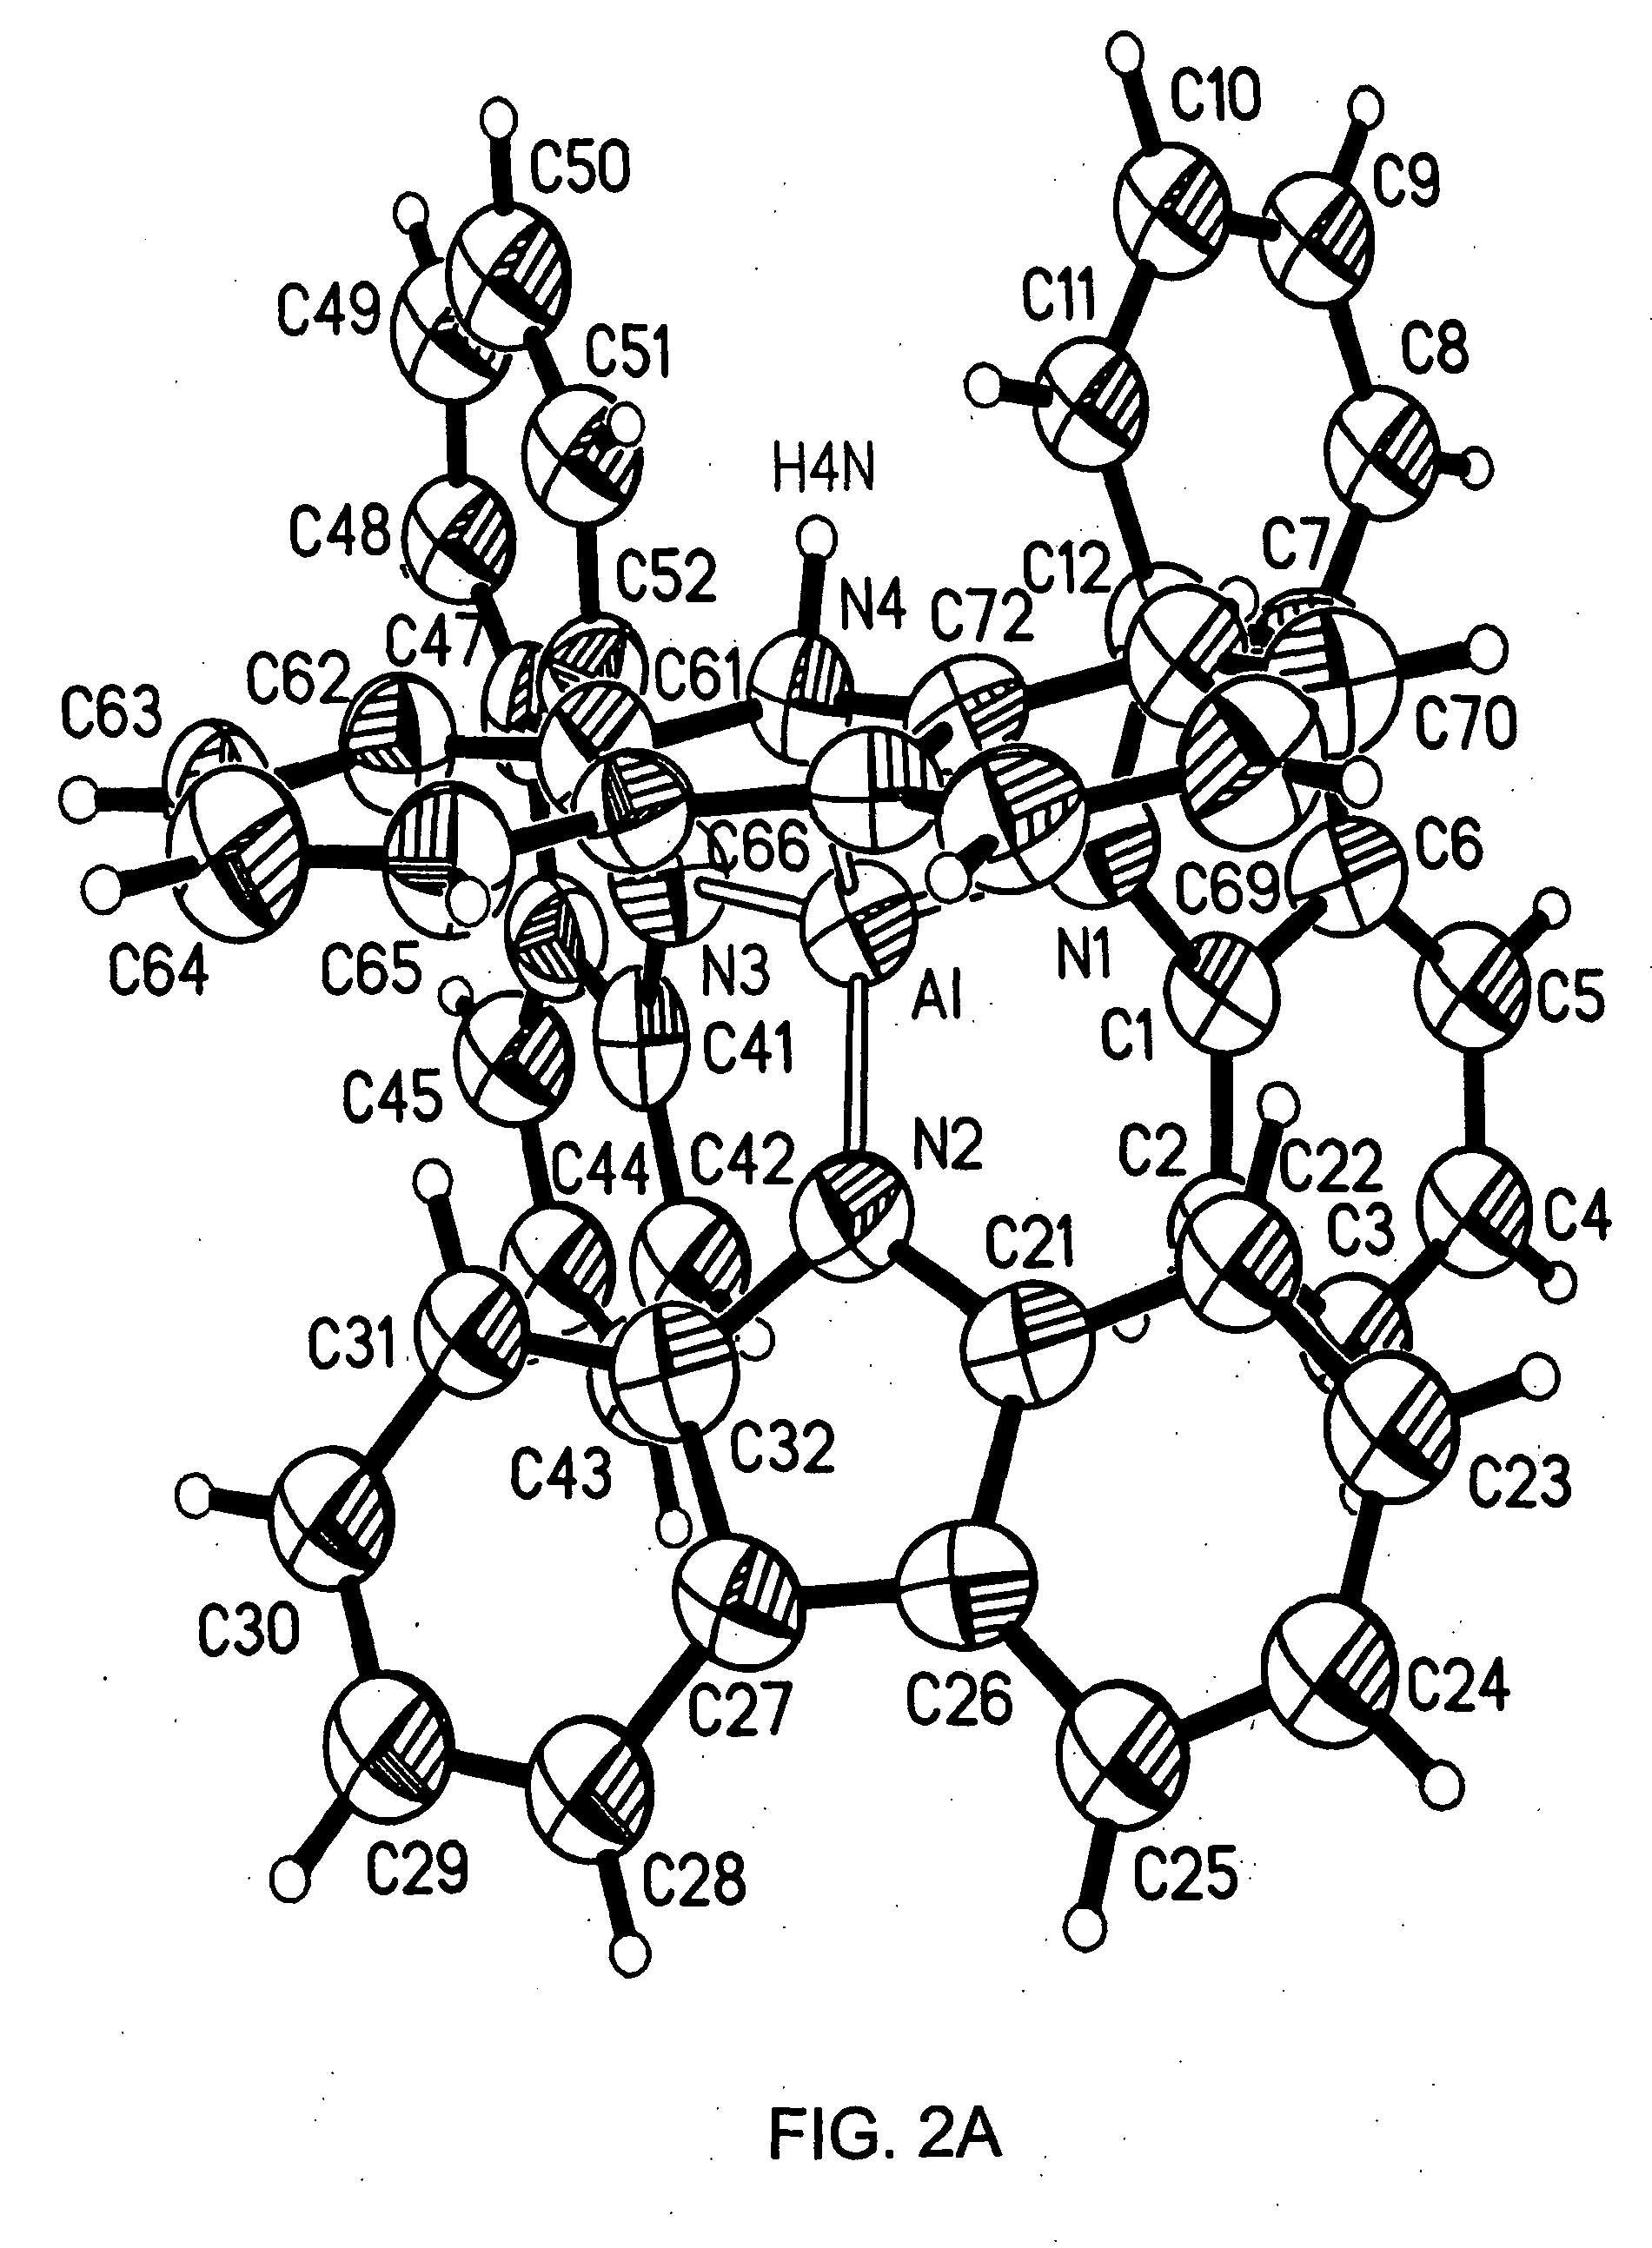 Heterocyclic nitrogen-containing activators and catalyst systems for olefin polymerization